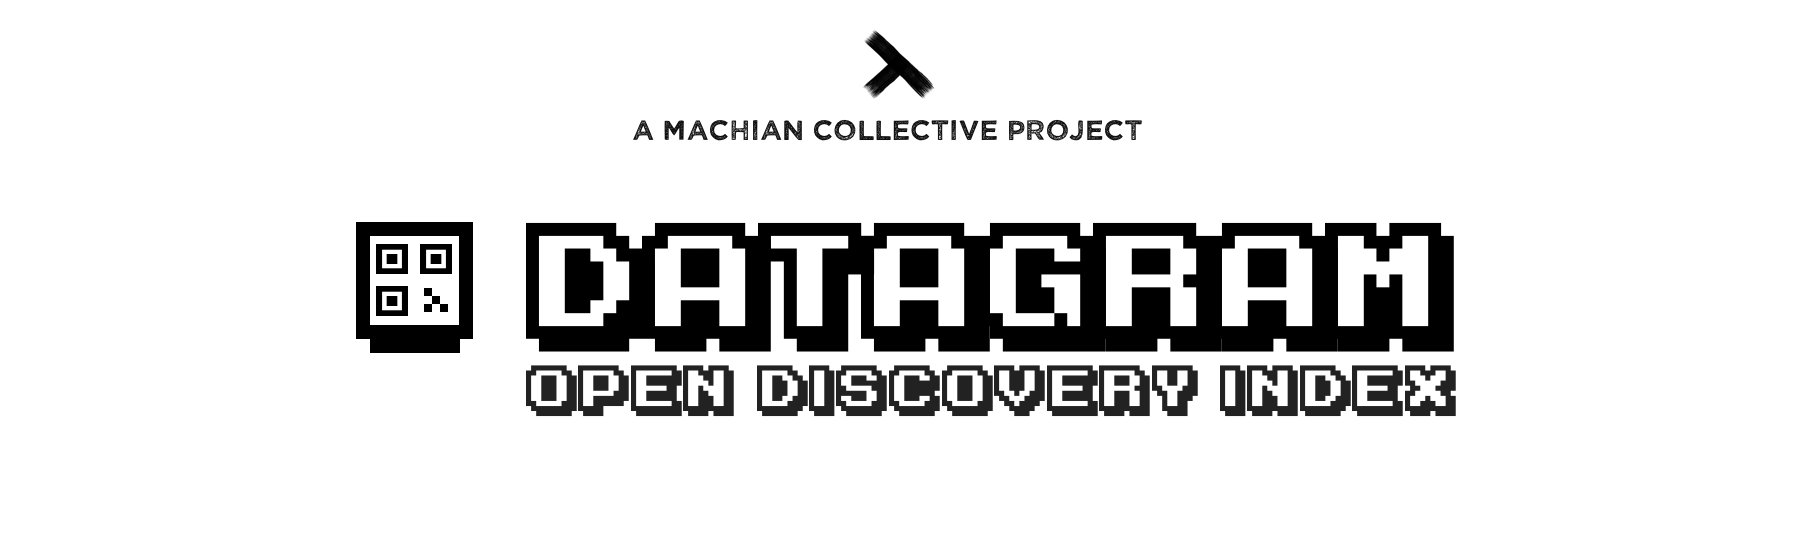 Datagram Open Discovery Index